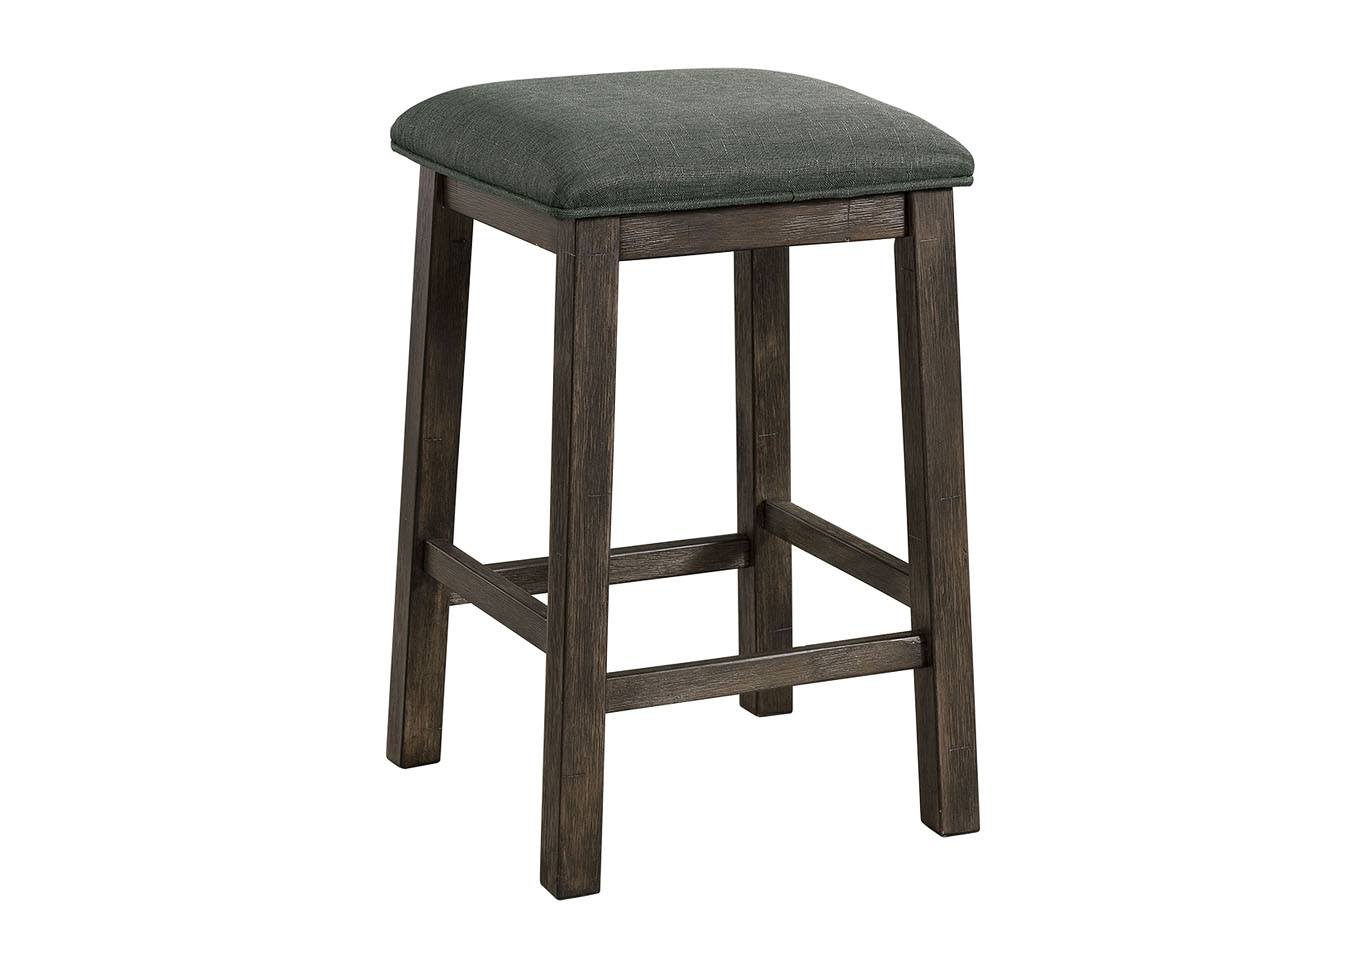 Shelter Bay Slim Counter Height Table with 3 Stools,Instore